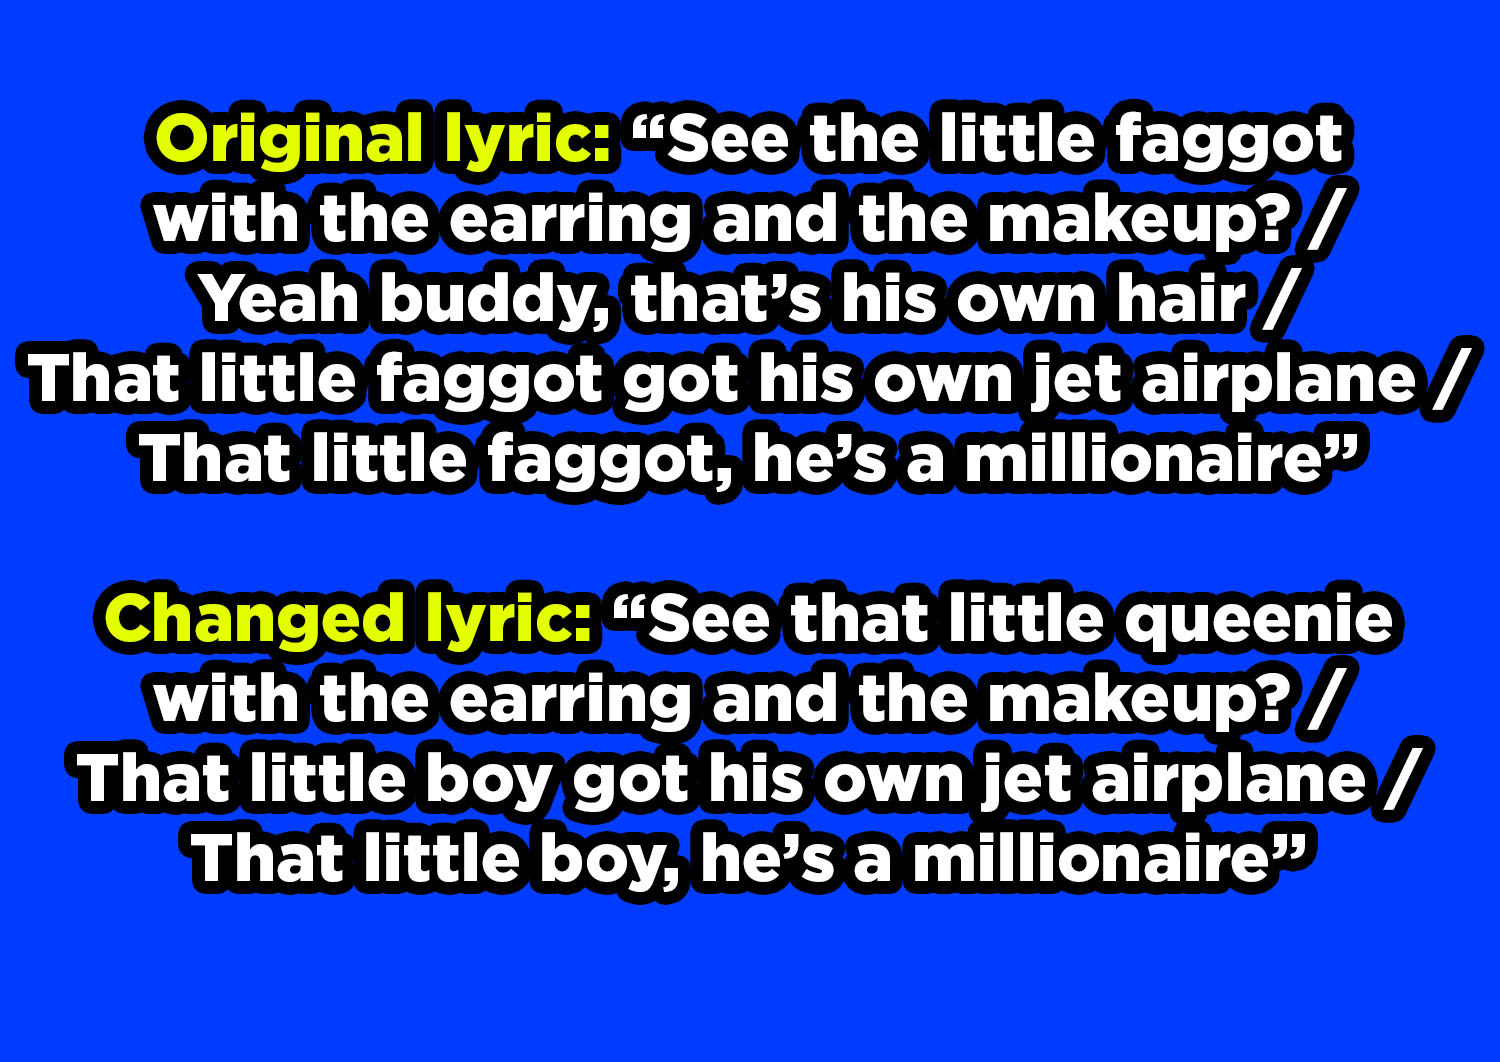 In the original lyric, &quot;See the little faggot with the earring and the makeup?&quot; and &quot;That little faggot got his own jet airplane, that little faggot, he&#x27;s a millionaire,&quot; &quot;little faggot&quot; changed to &quot;little queenie&quot; and &quot;little boy&quot;